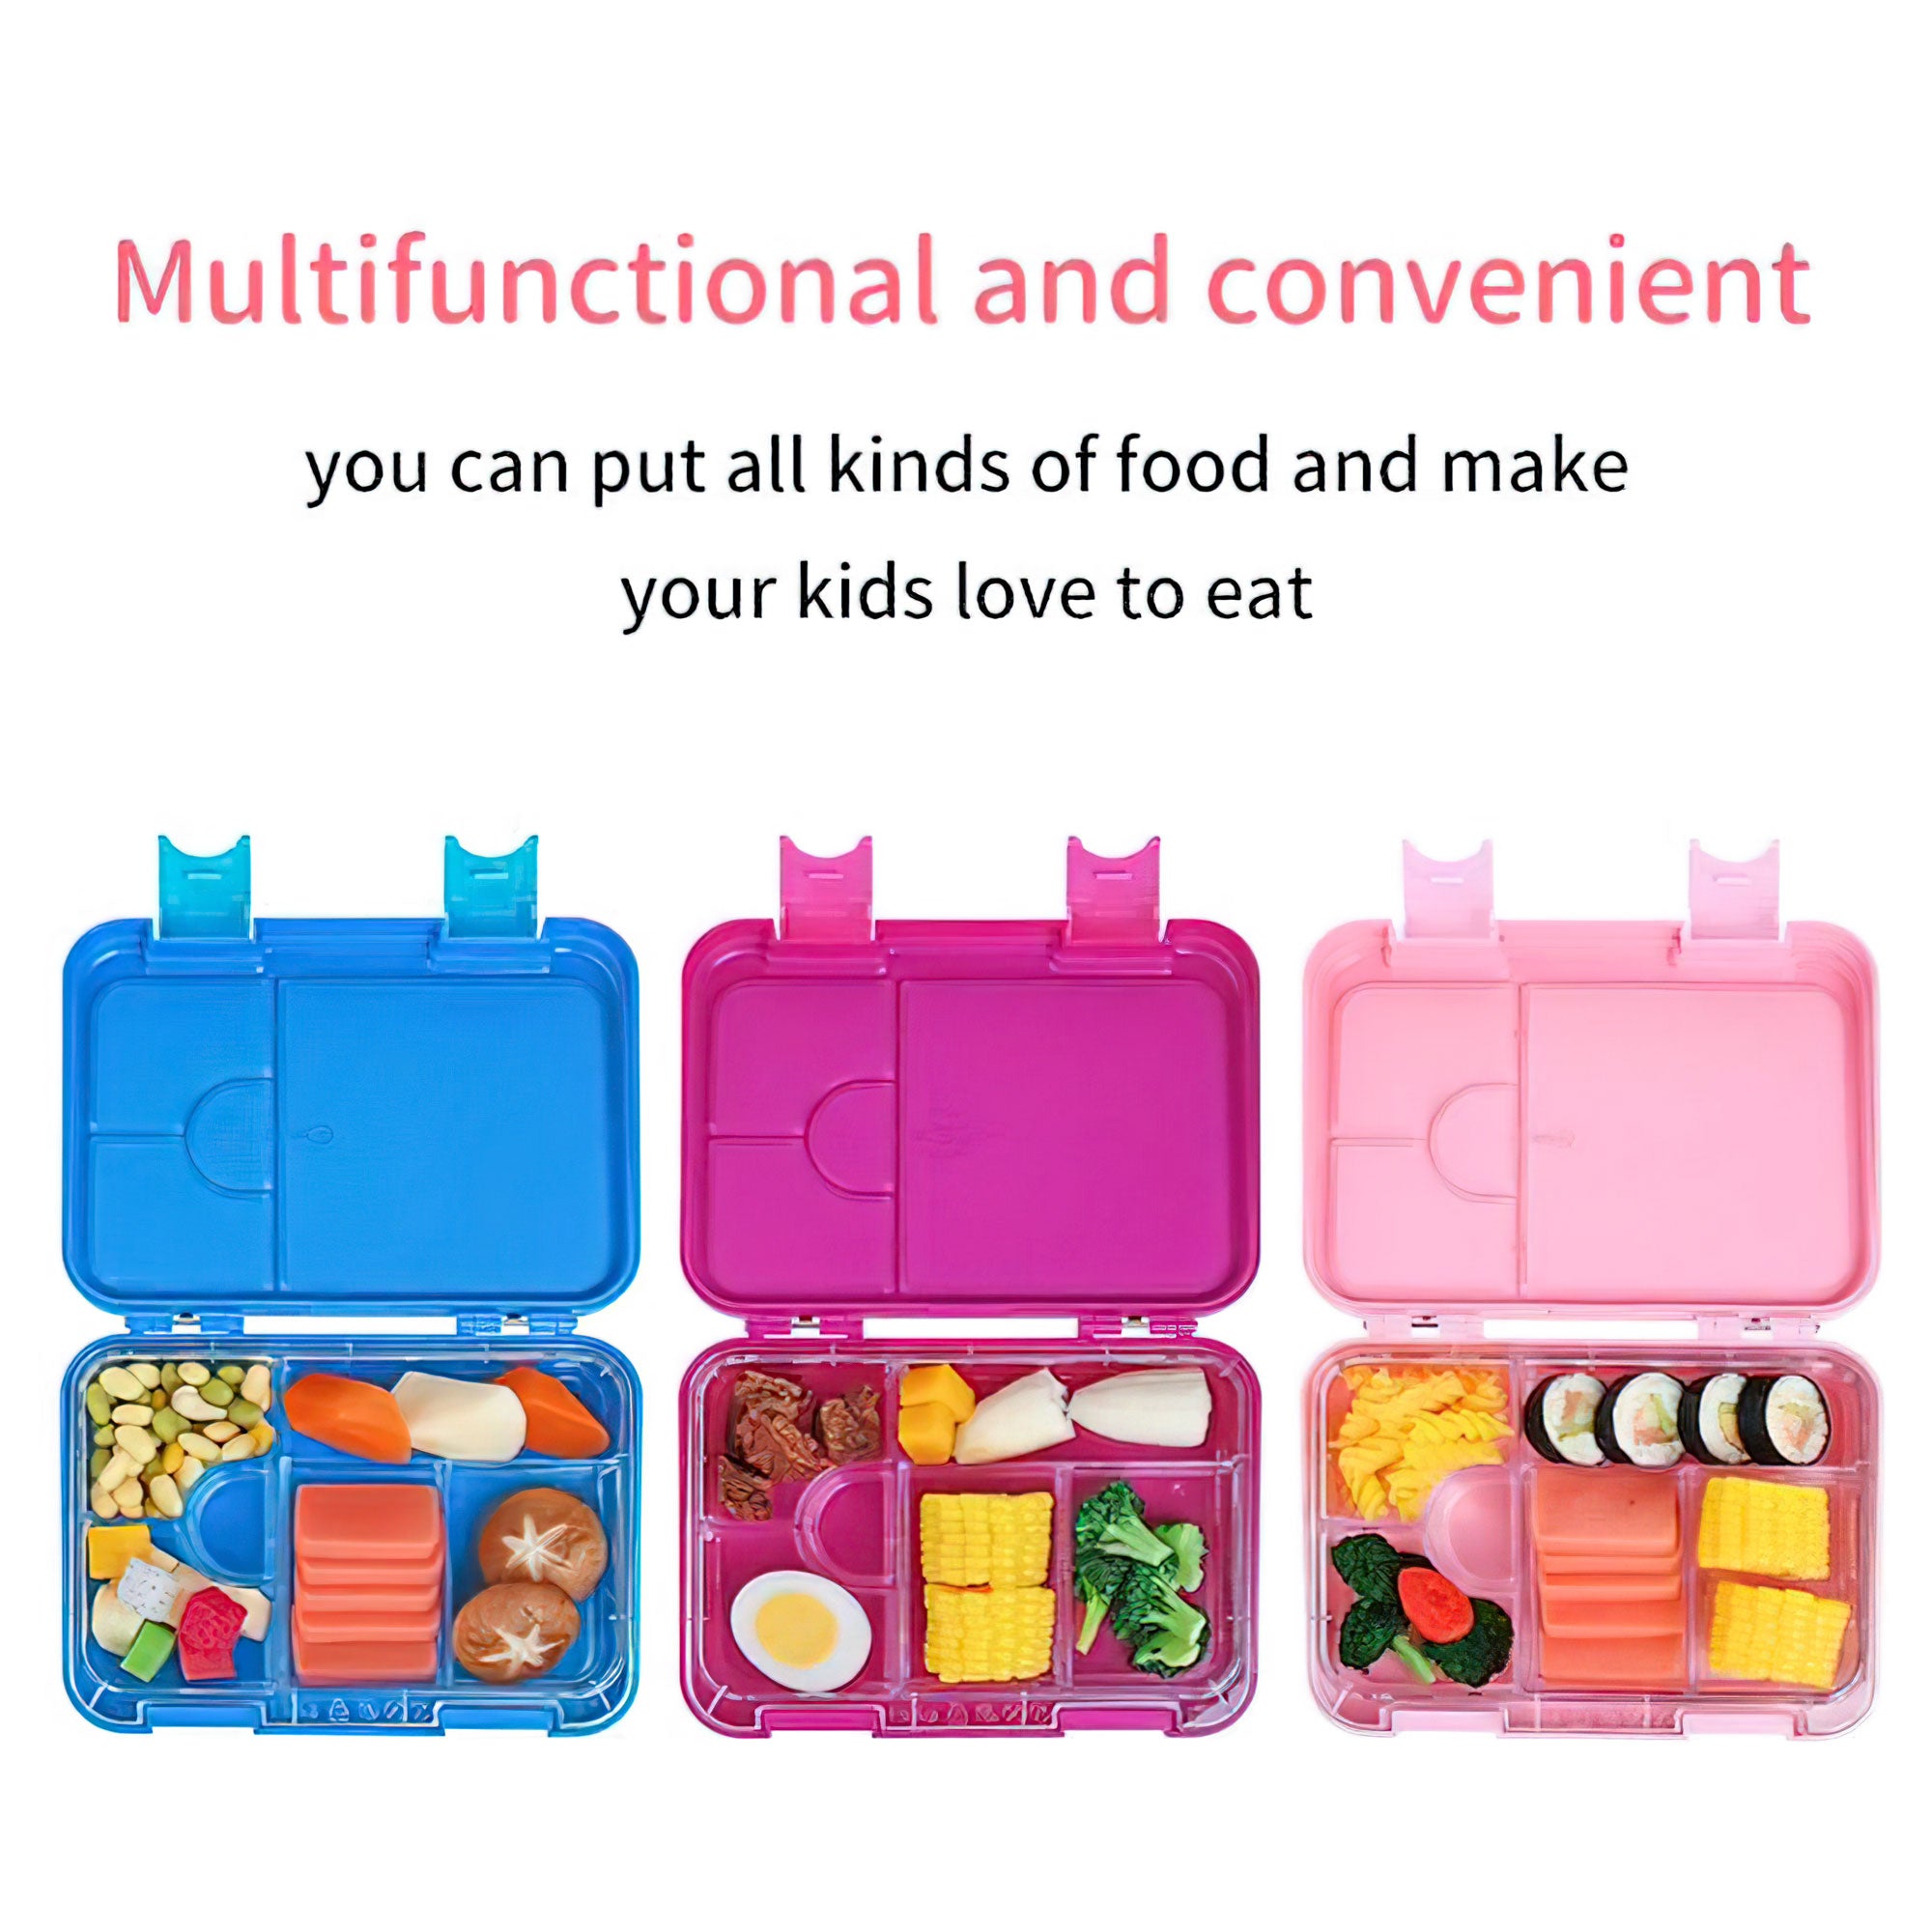 Snack Attack Bento Box or Lunch Box for Kids 4 & 6 Convertible Compartments  | Portion Lunch Box | Food Graded Materials BPA FREE & LEAK PROOF| Made of